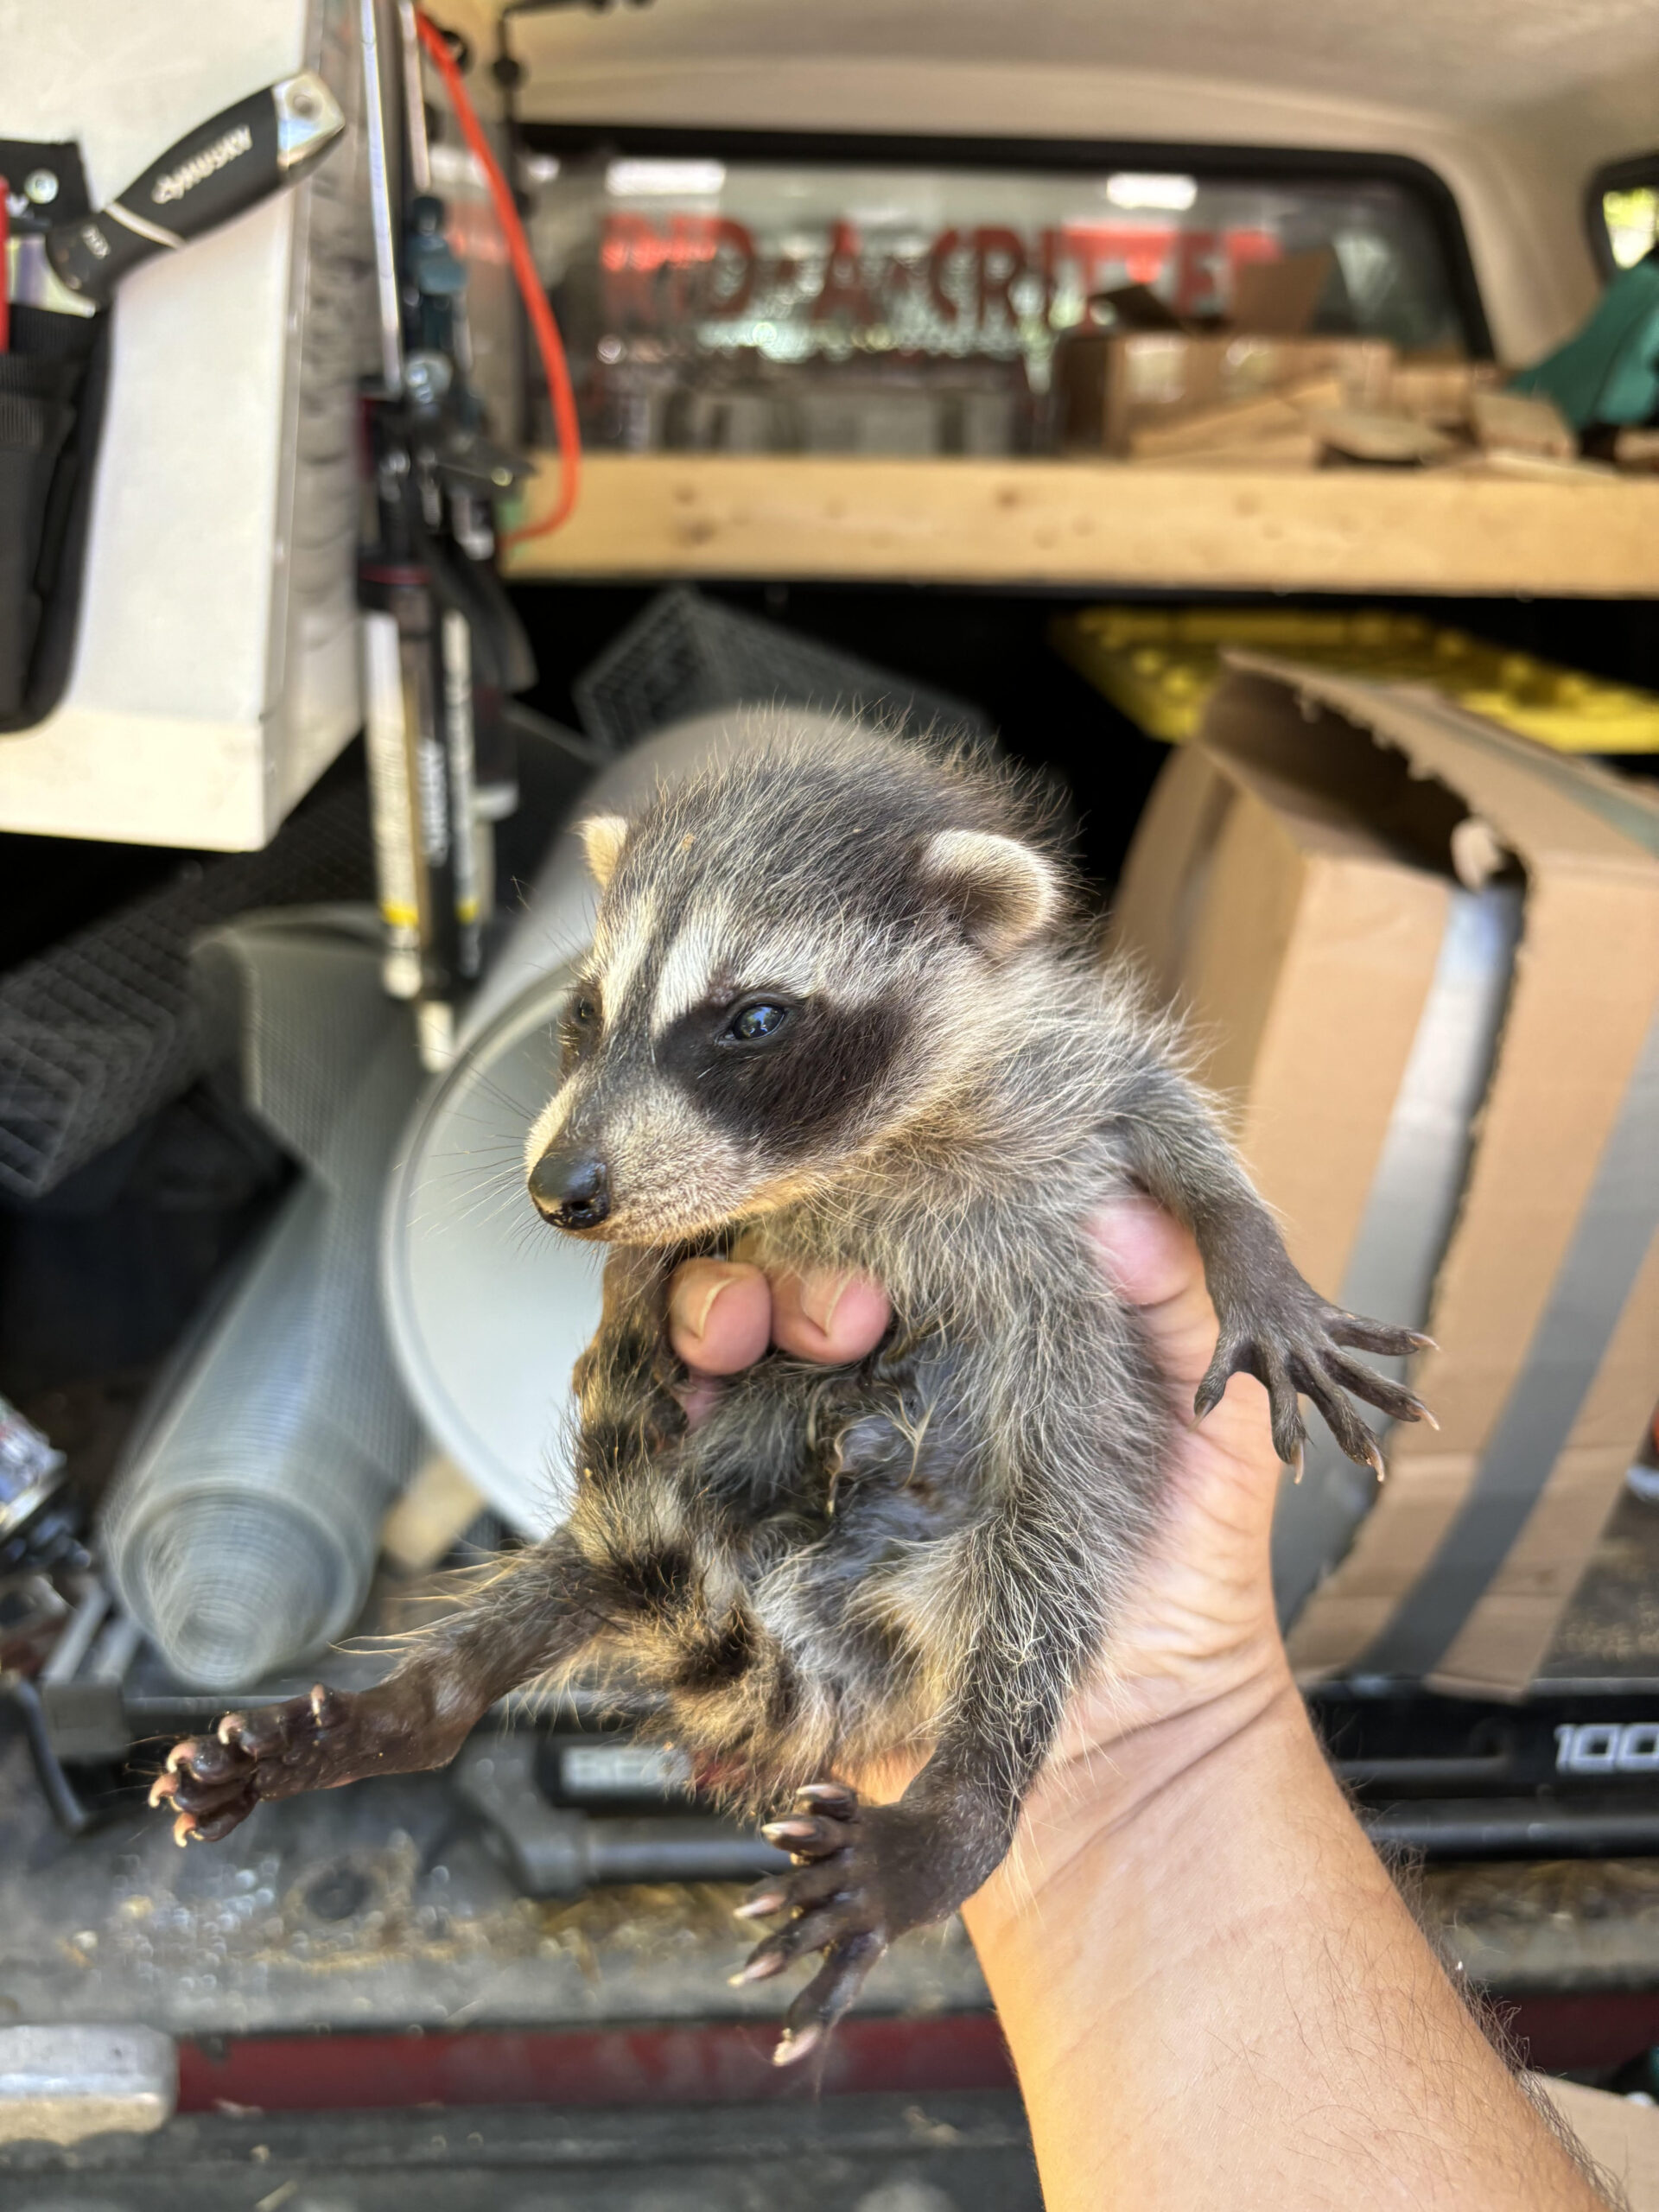 Removed juvenile raccoon from an attic in Roswell Ga